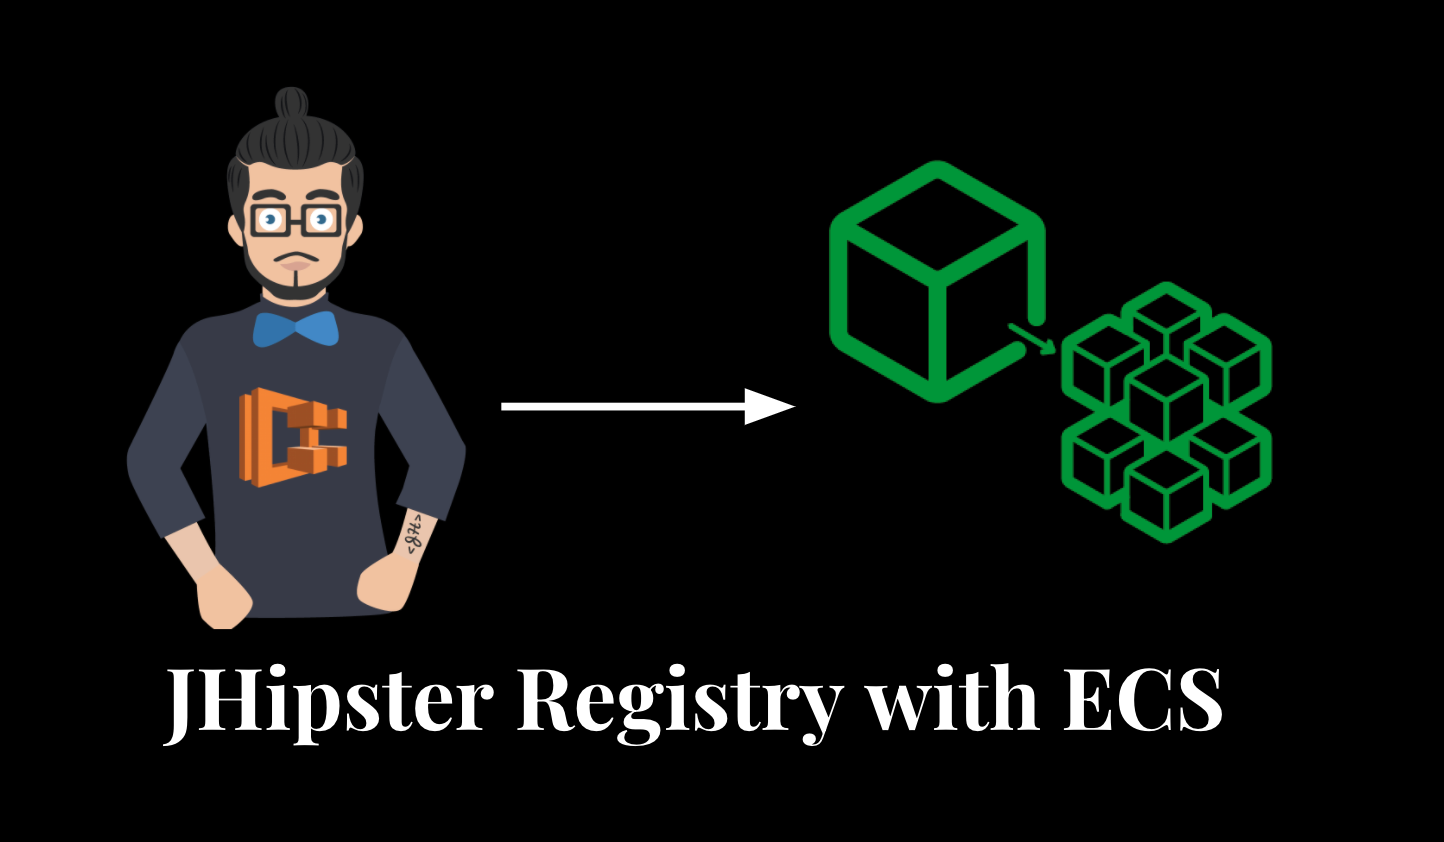 JHipster Registry with ECS